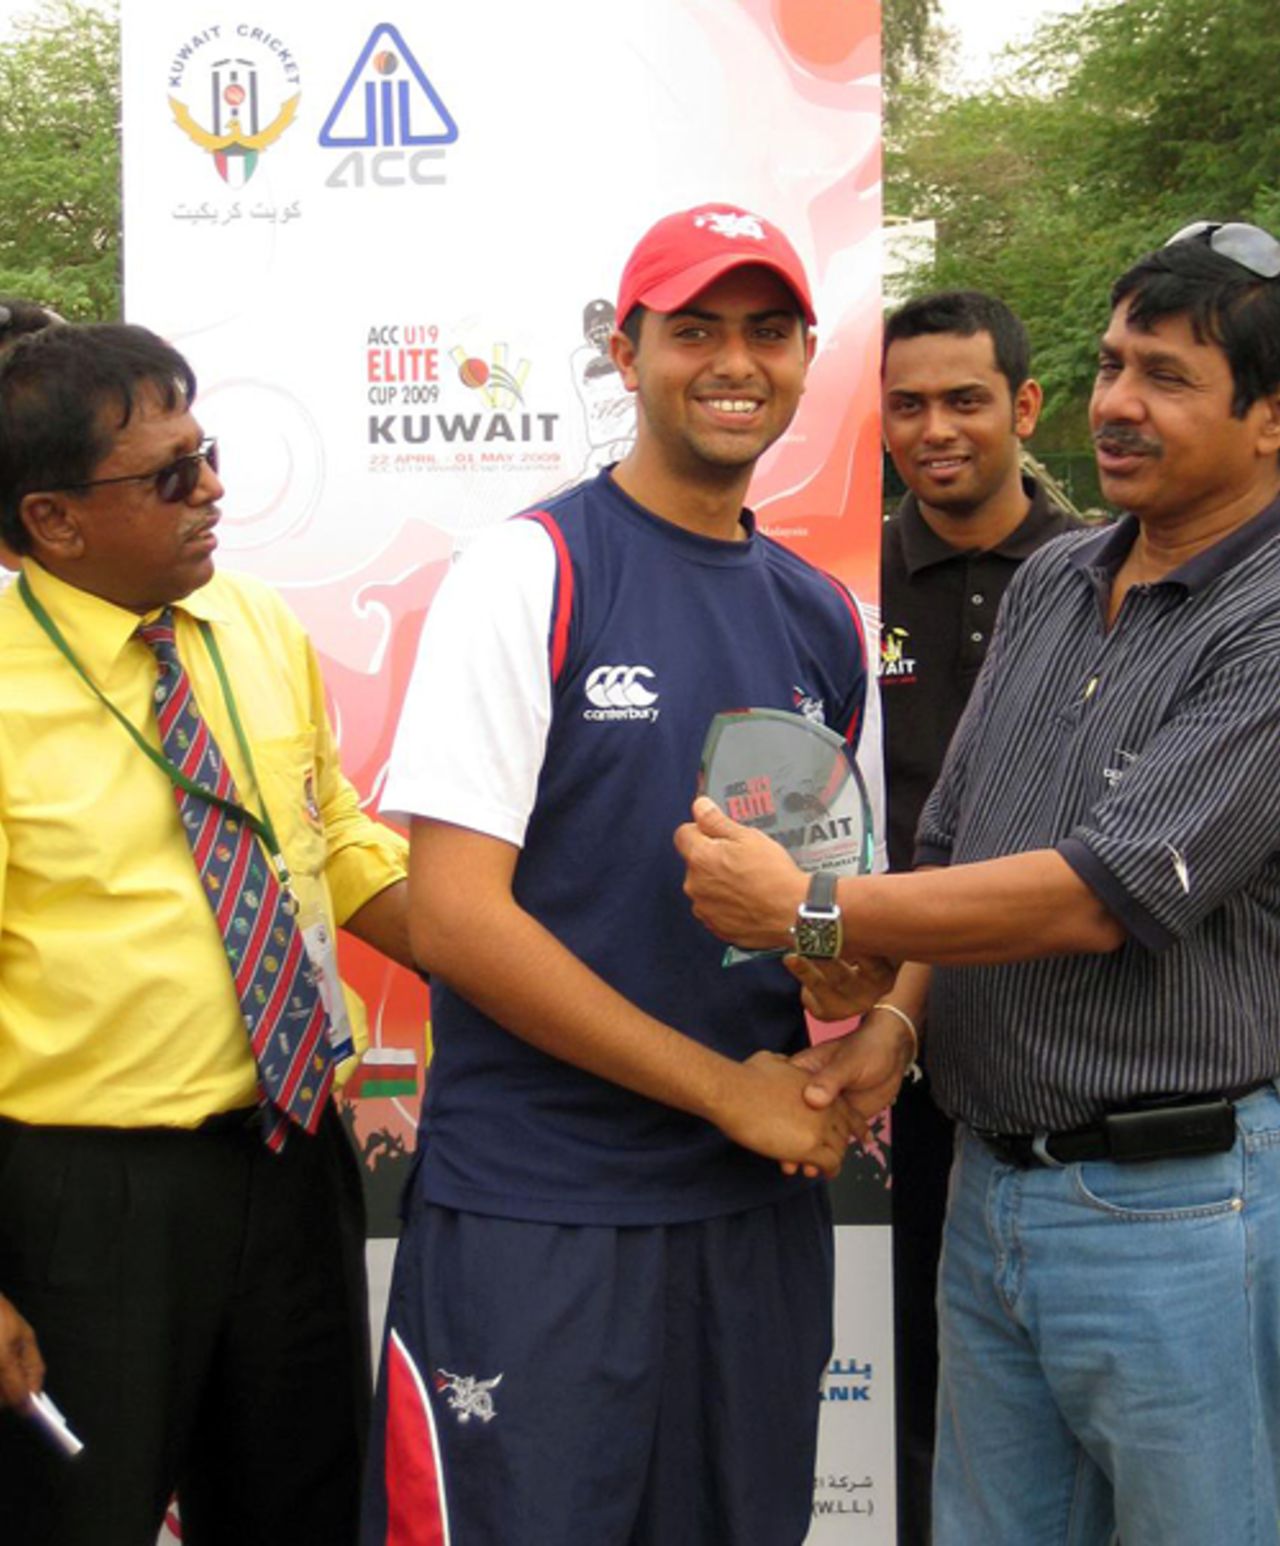 Niaz Ali receives his Player of the Match award from Mr. Bandula Wannapura after the ACC Under-19 Elite Cup semi-final victory over Qatar